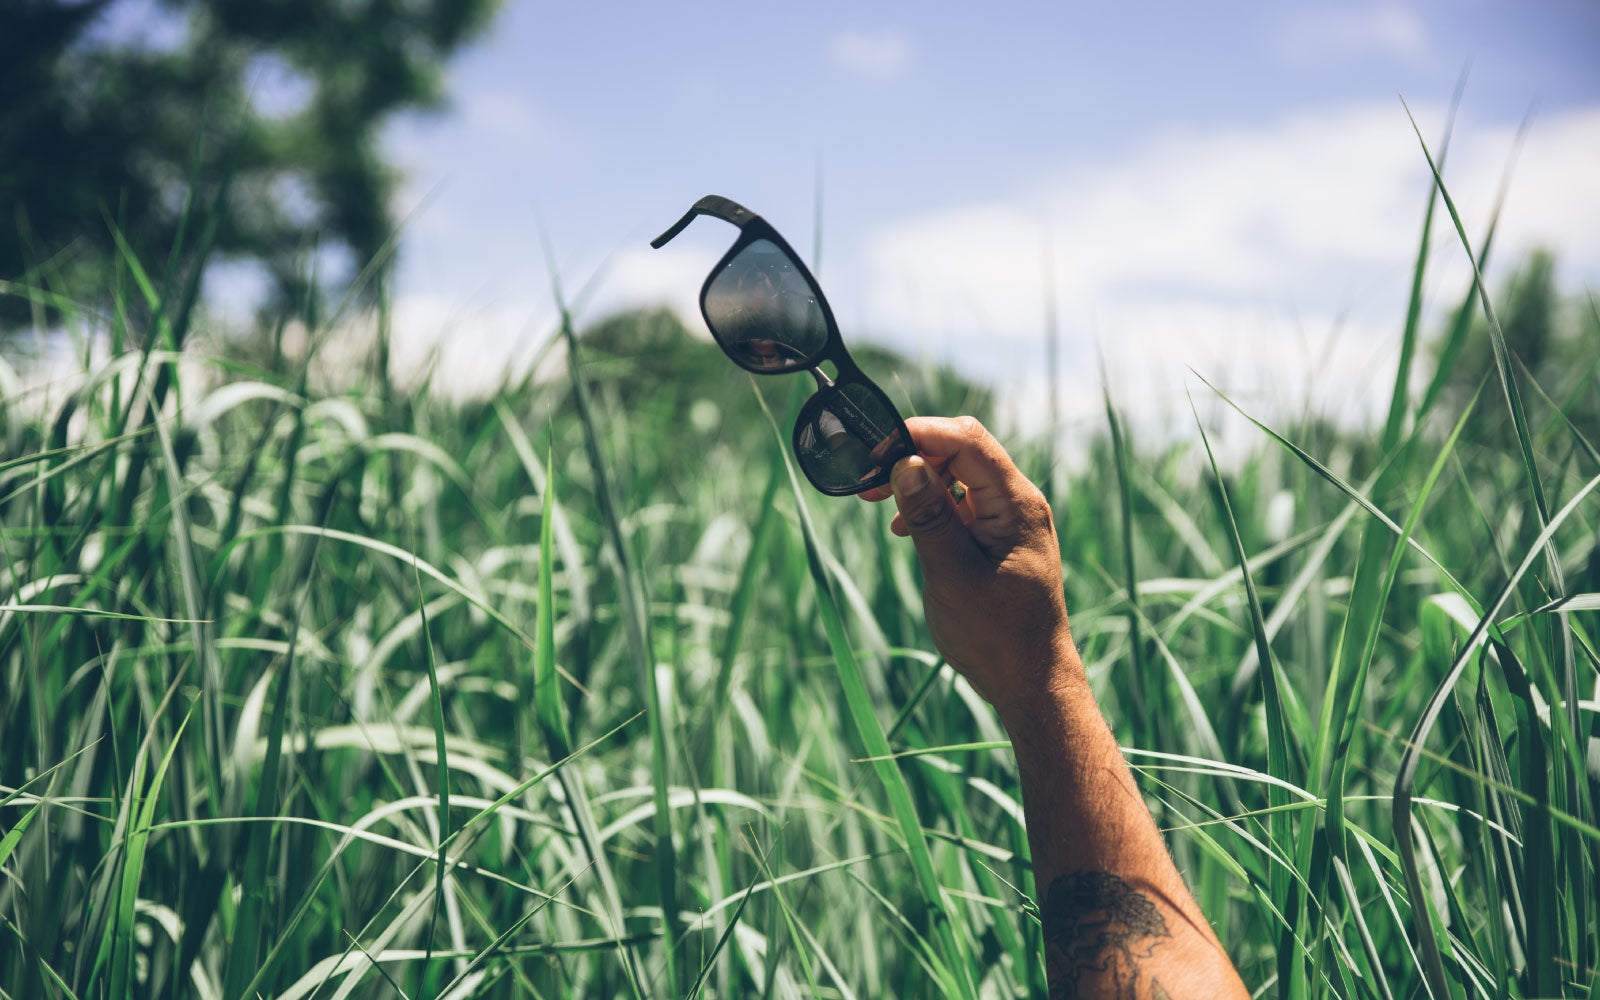 Distil Union Folly Sunglasses in a green field with blue skies